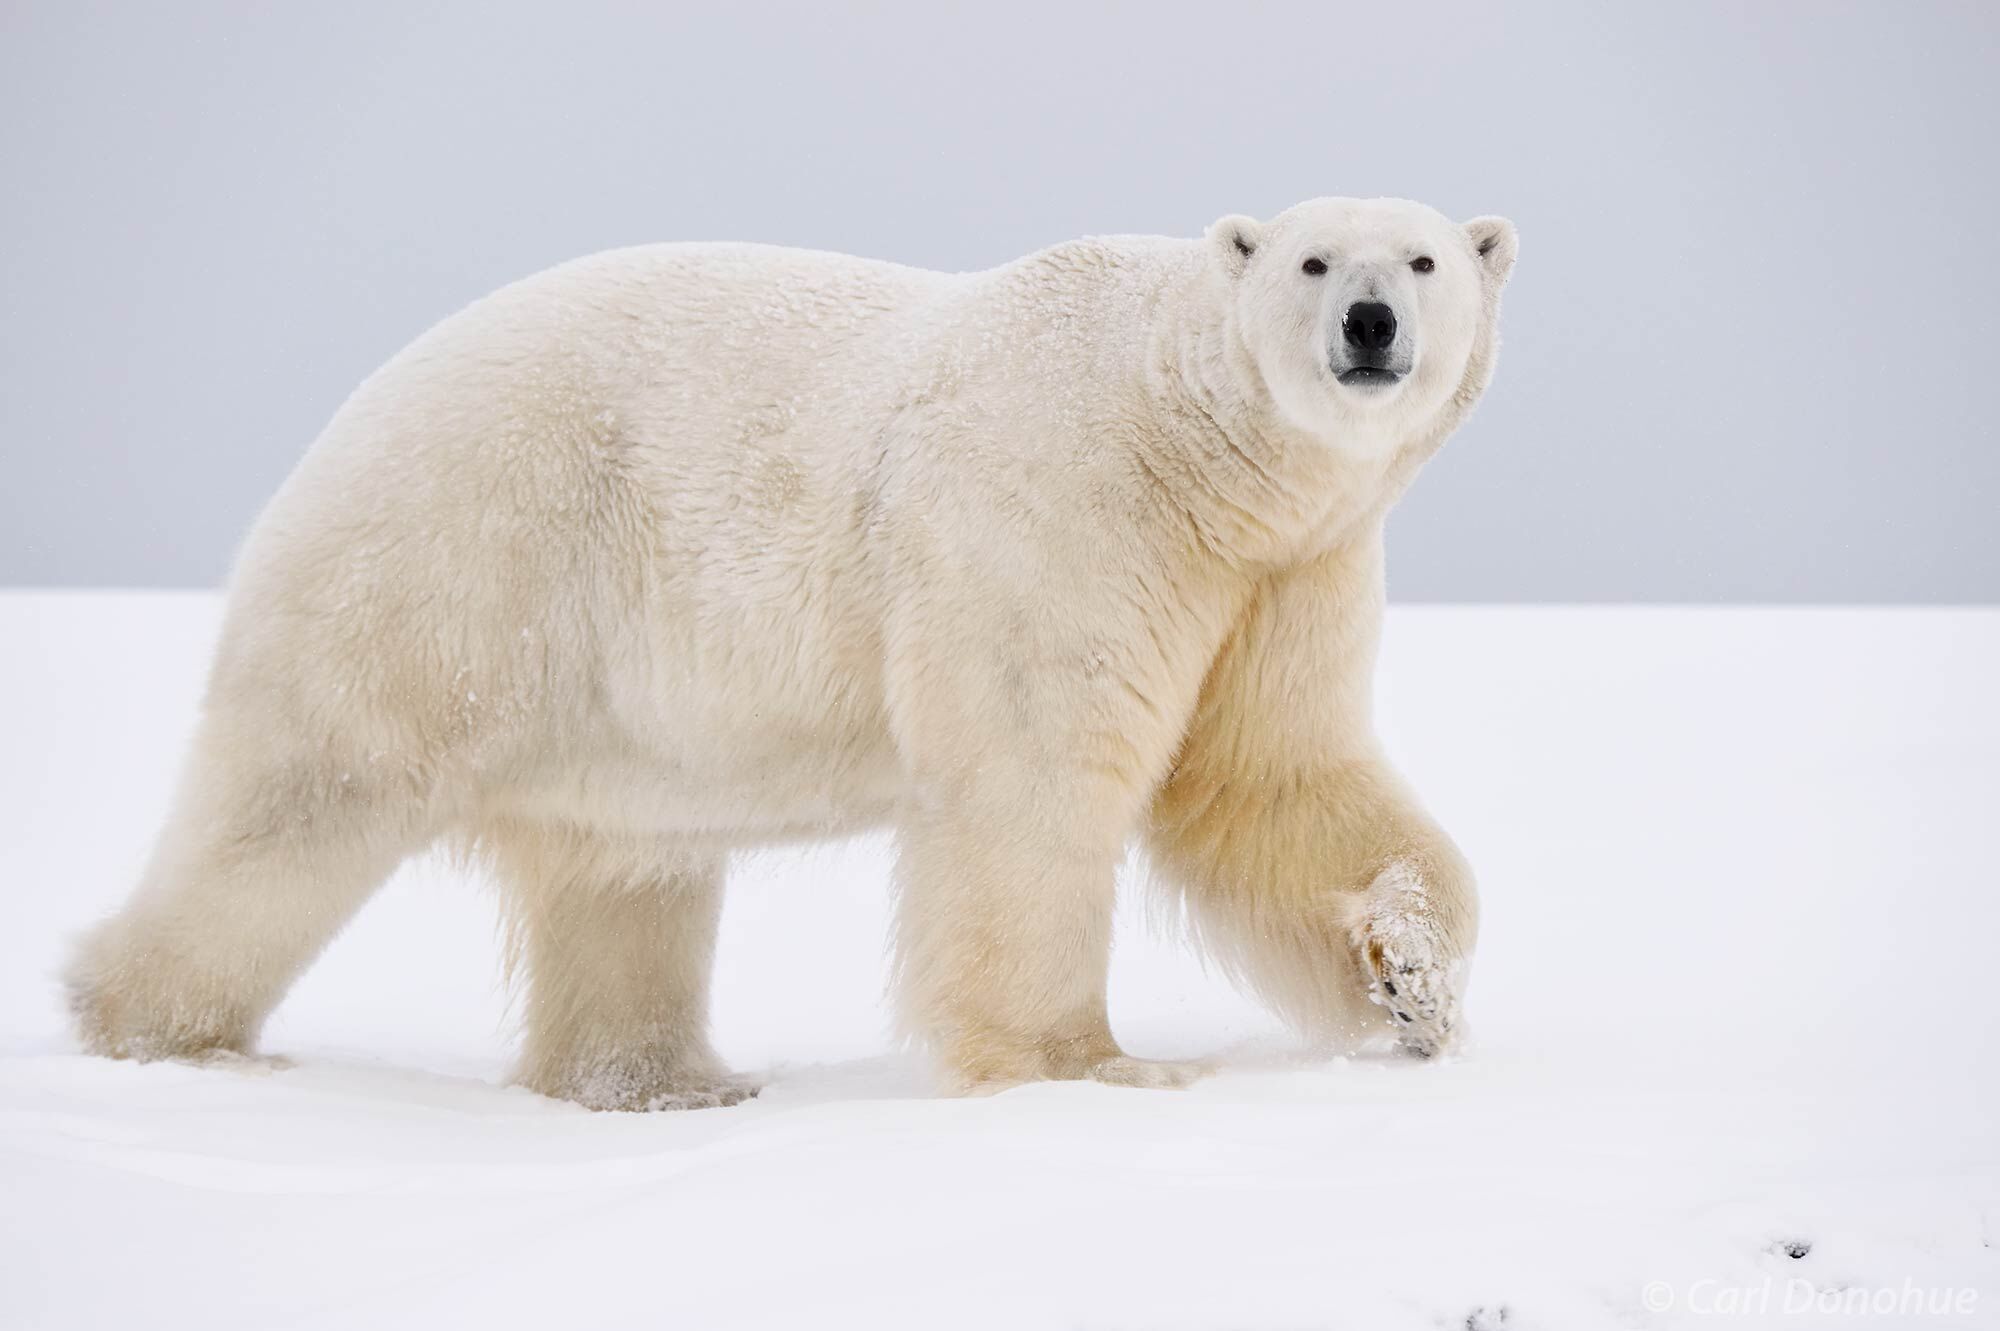 A large male adult polar bear (Ursus maritimus), weighing well over 1000 pounds, stalks across the frozen, snow-covered tundra...